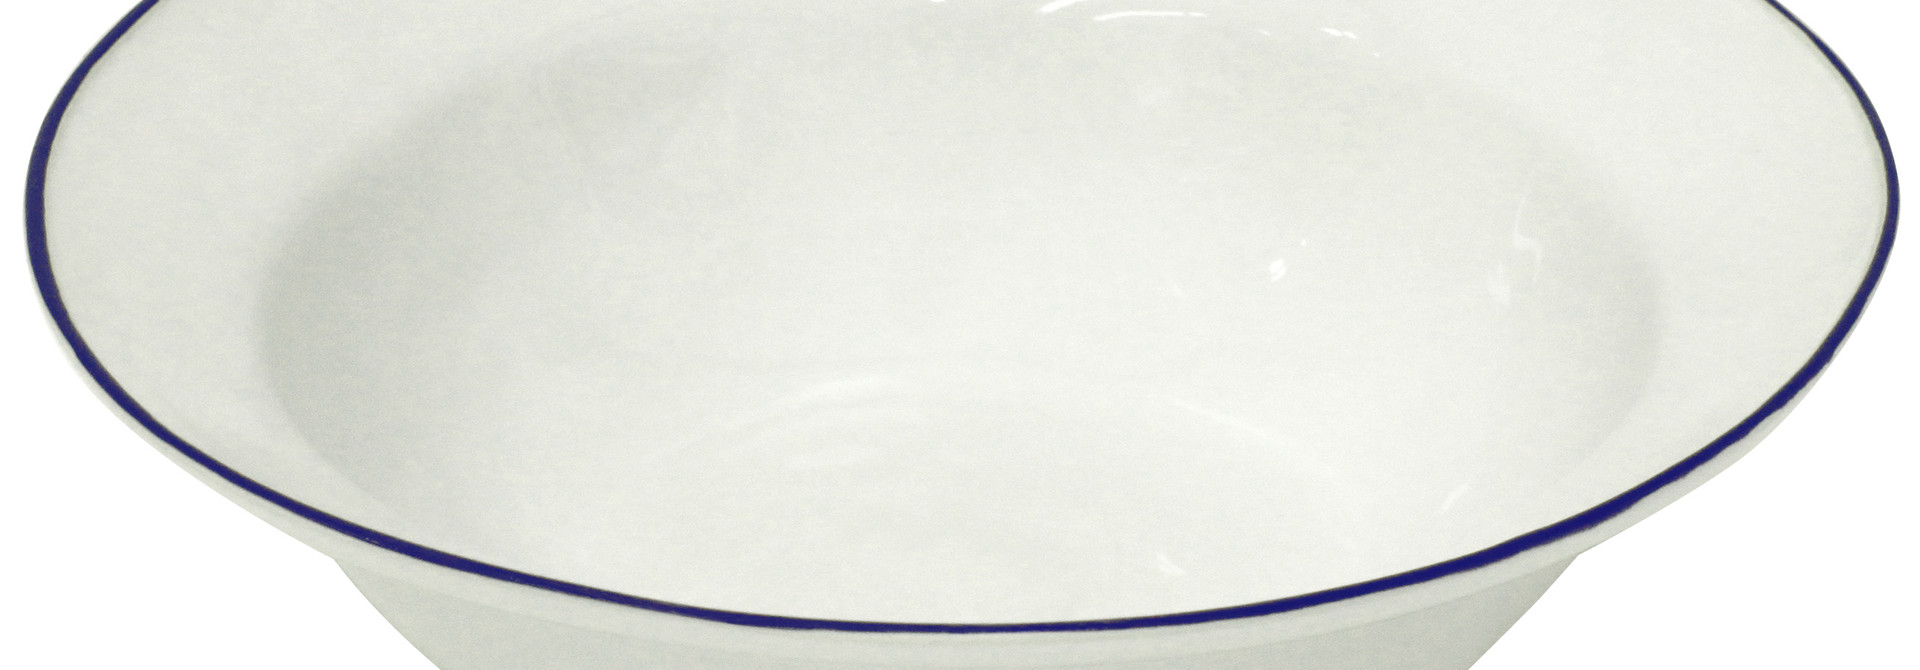 Beja | The White & Blue Serveware Collection